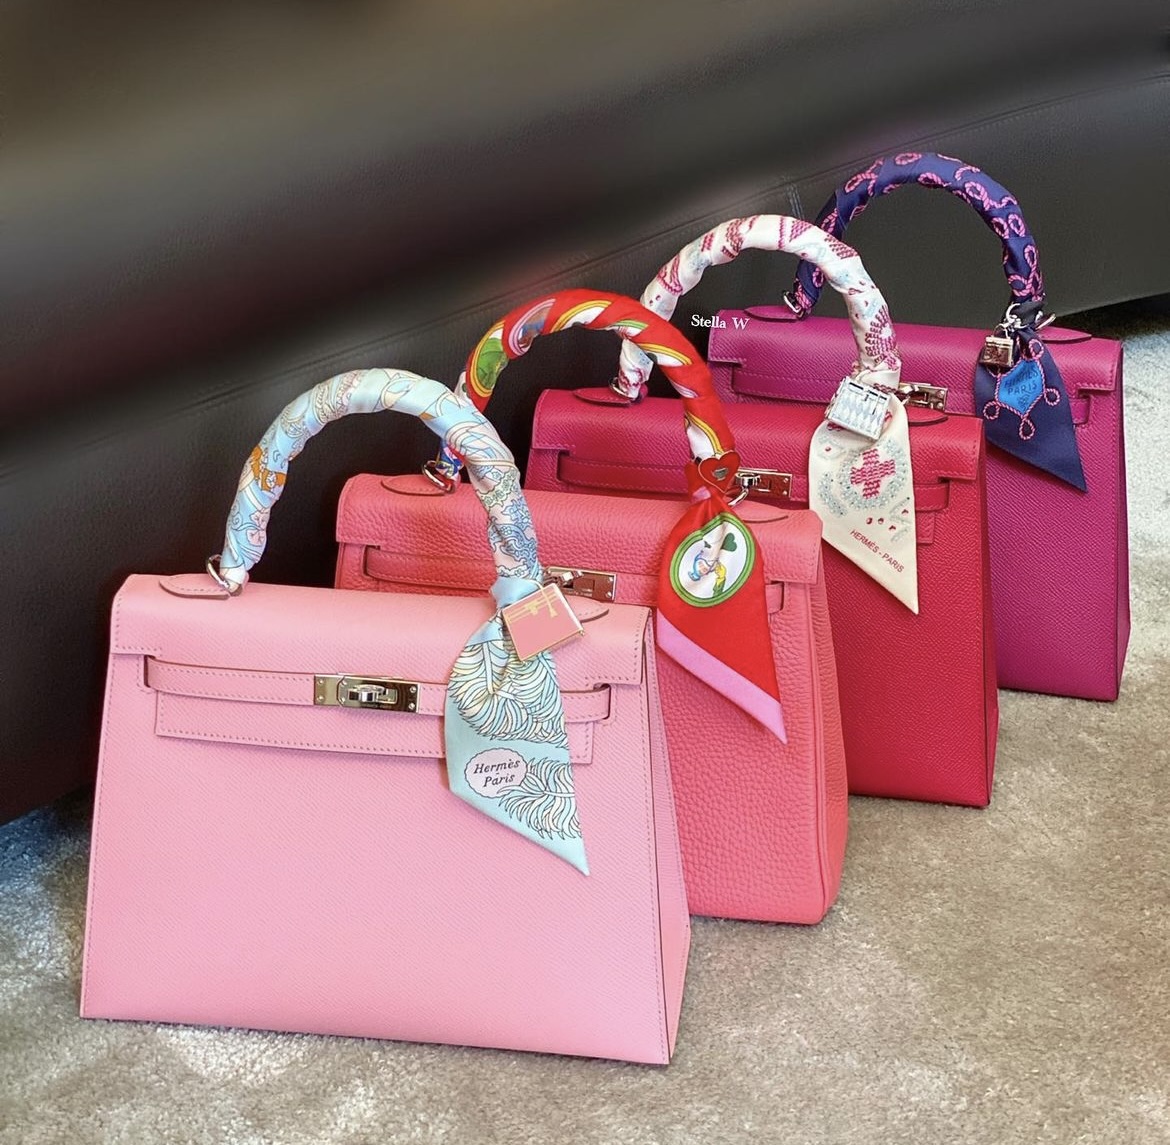 Why Does Hermès Produce Pink Bags With Palladium Hardware Instead of ...